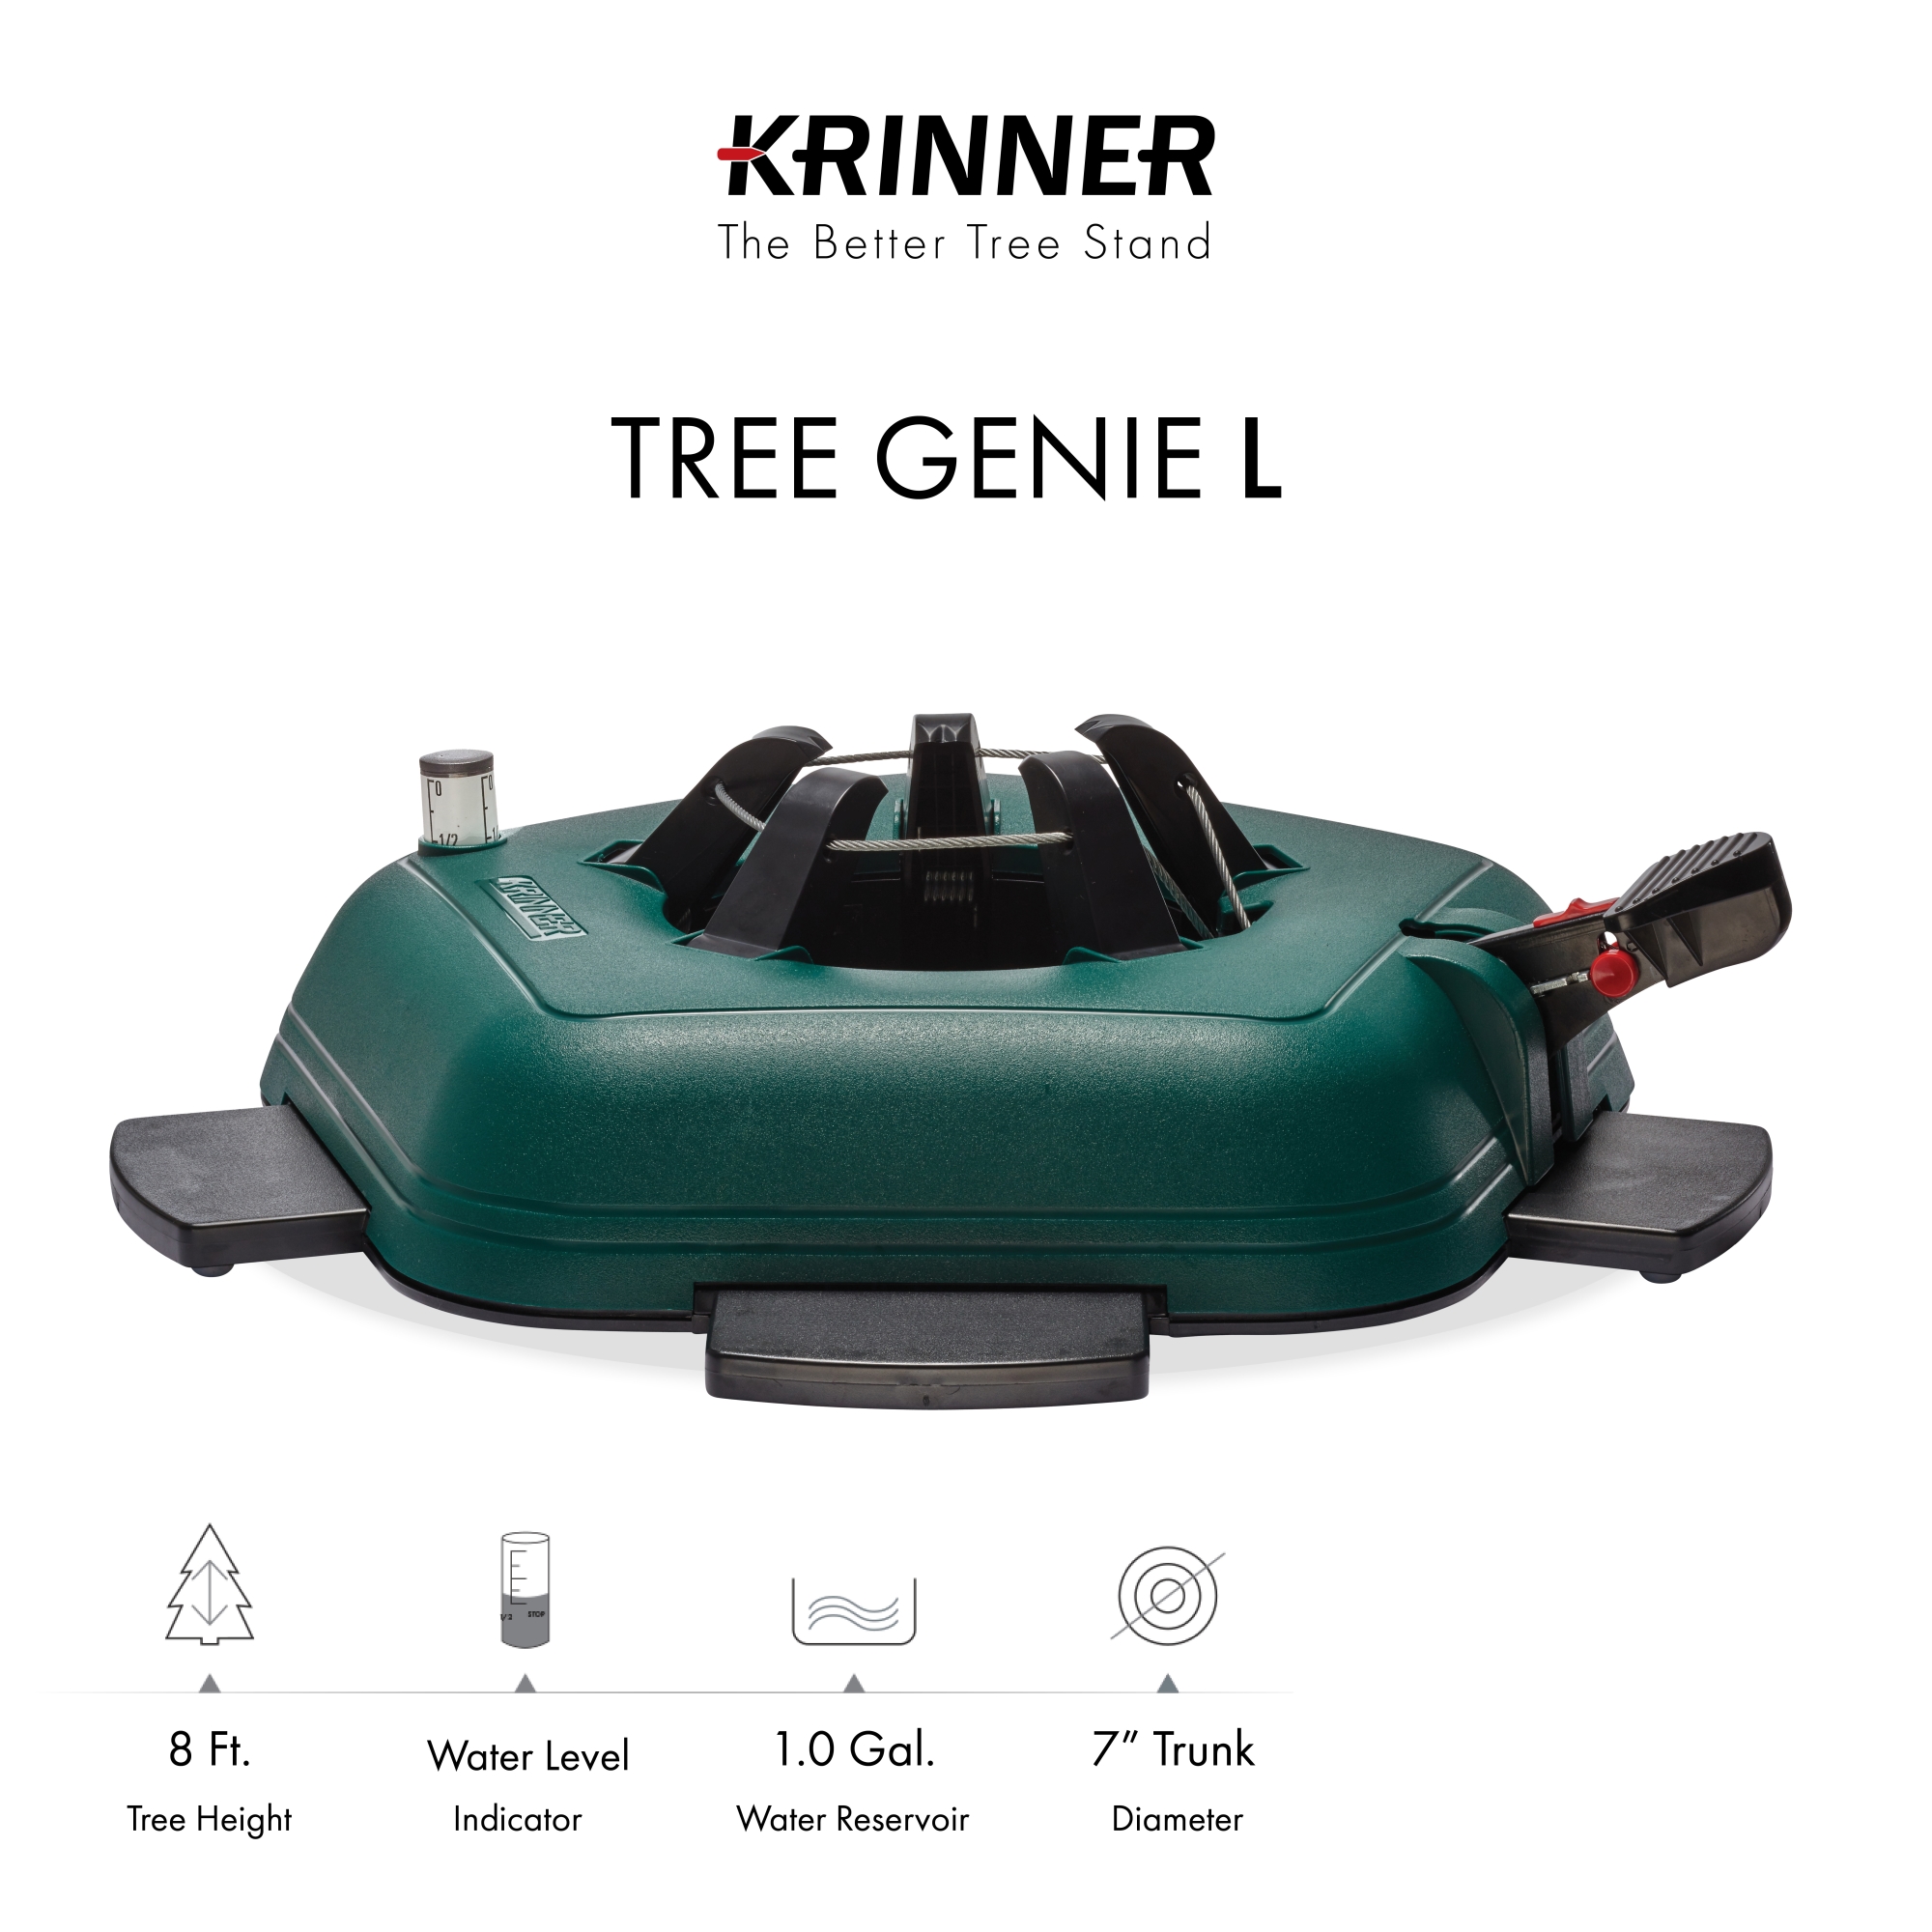 Krinner 94735 Tree Genie Deluxe Christmas Tree Stand w/ Water Level Indicator, Large - image 2 of 10